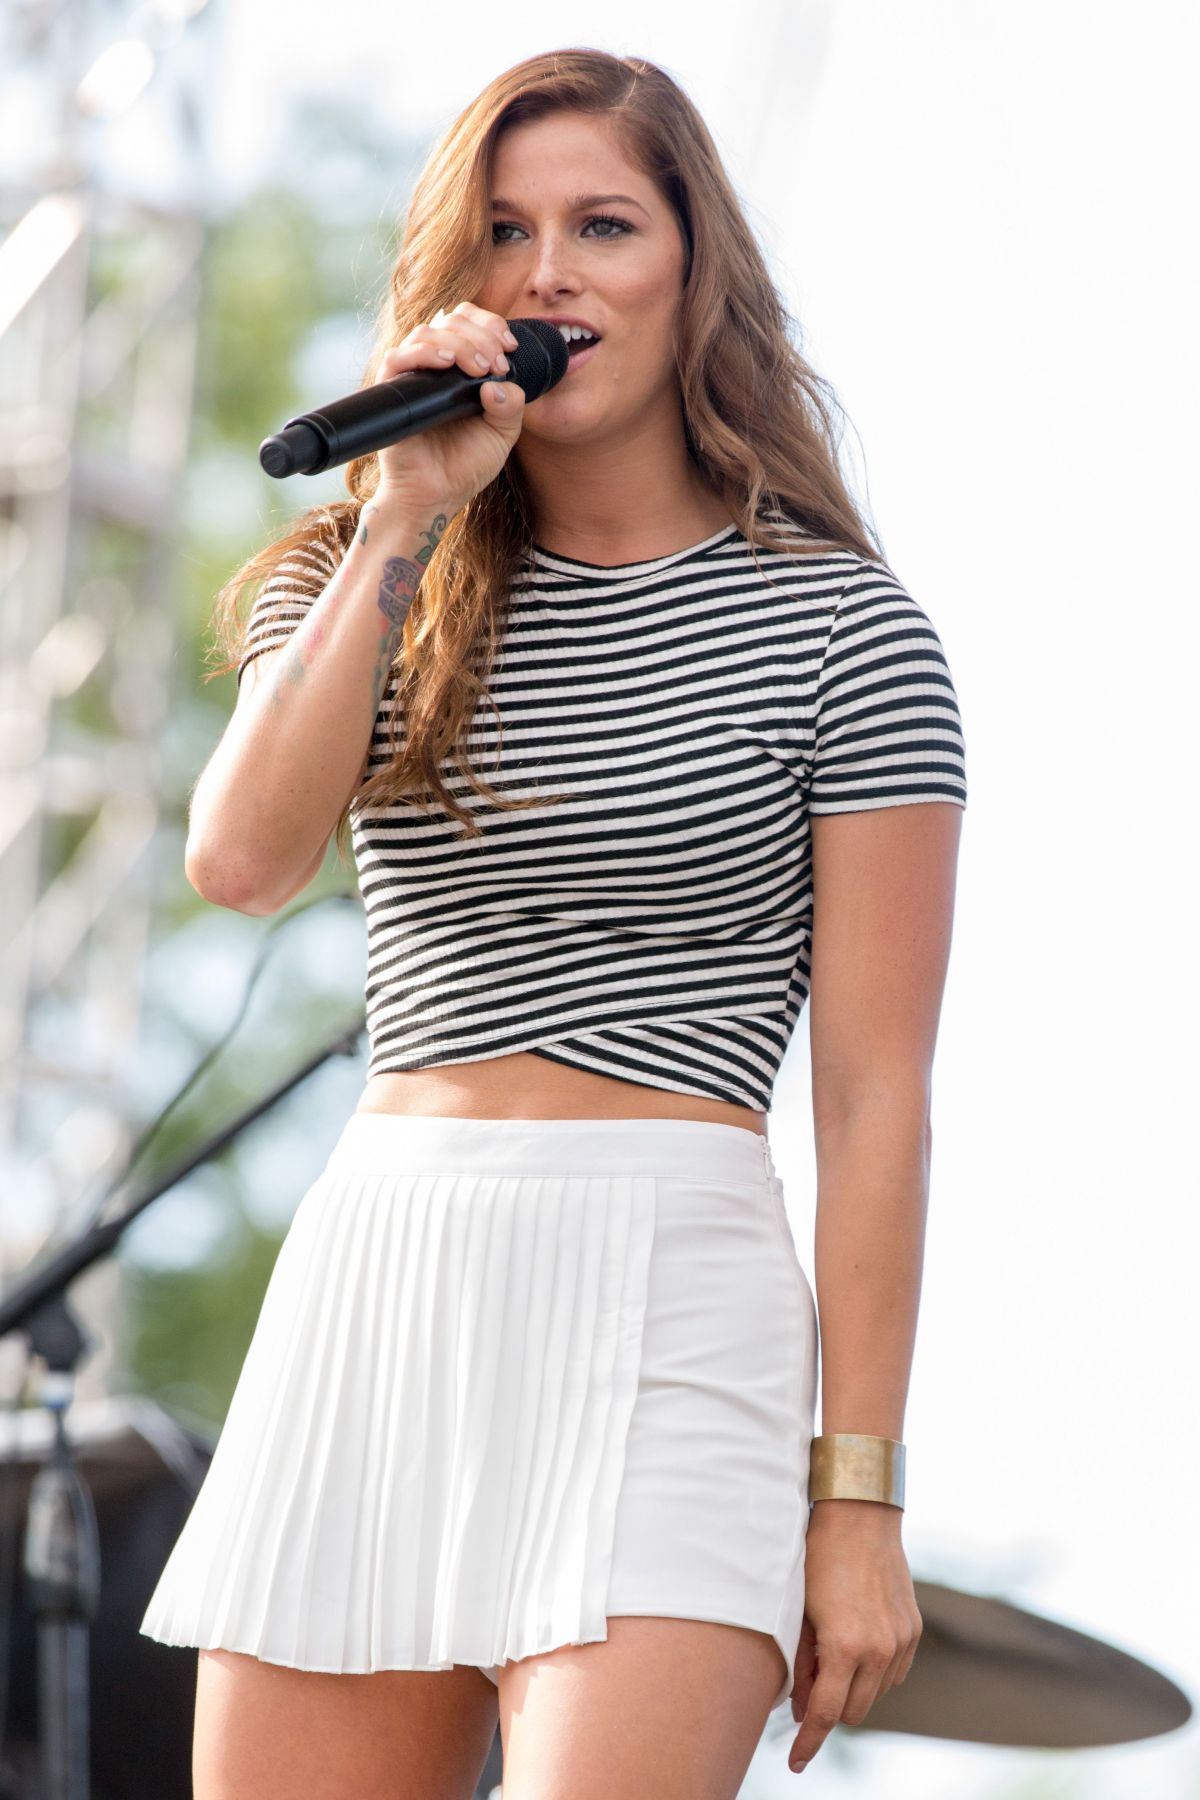 Cassadee Pope Performs At Jam Usa Music Festival In Wisconsin 07 24 2015 Hawtcelebs